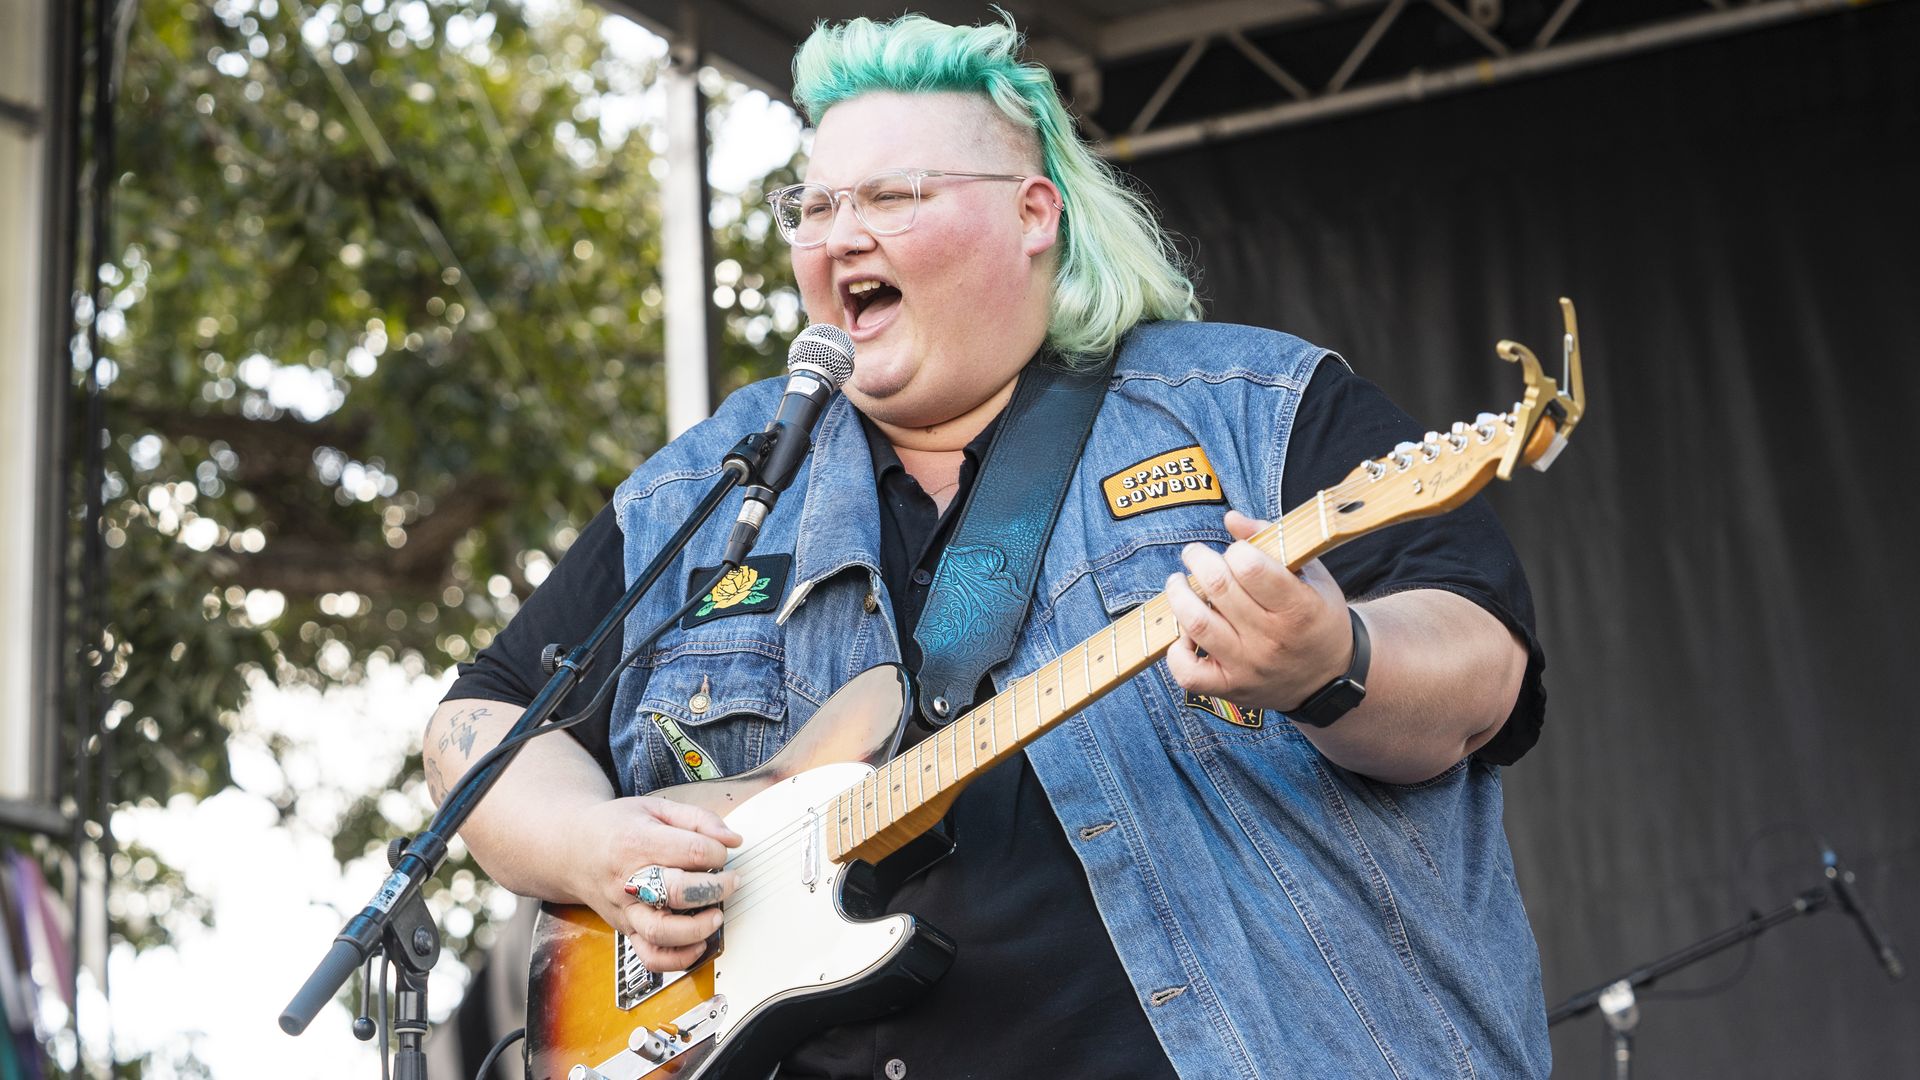 A green-haired musician rocks a guitar on stage